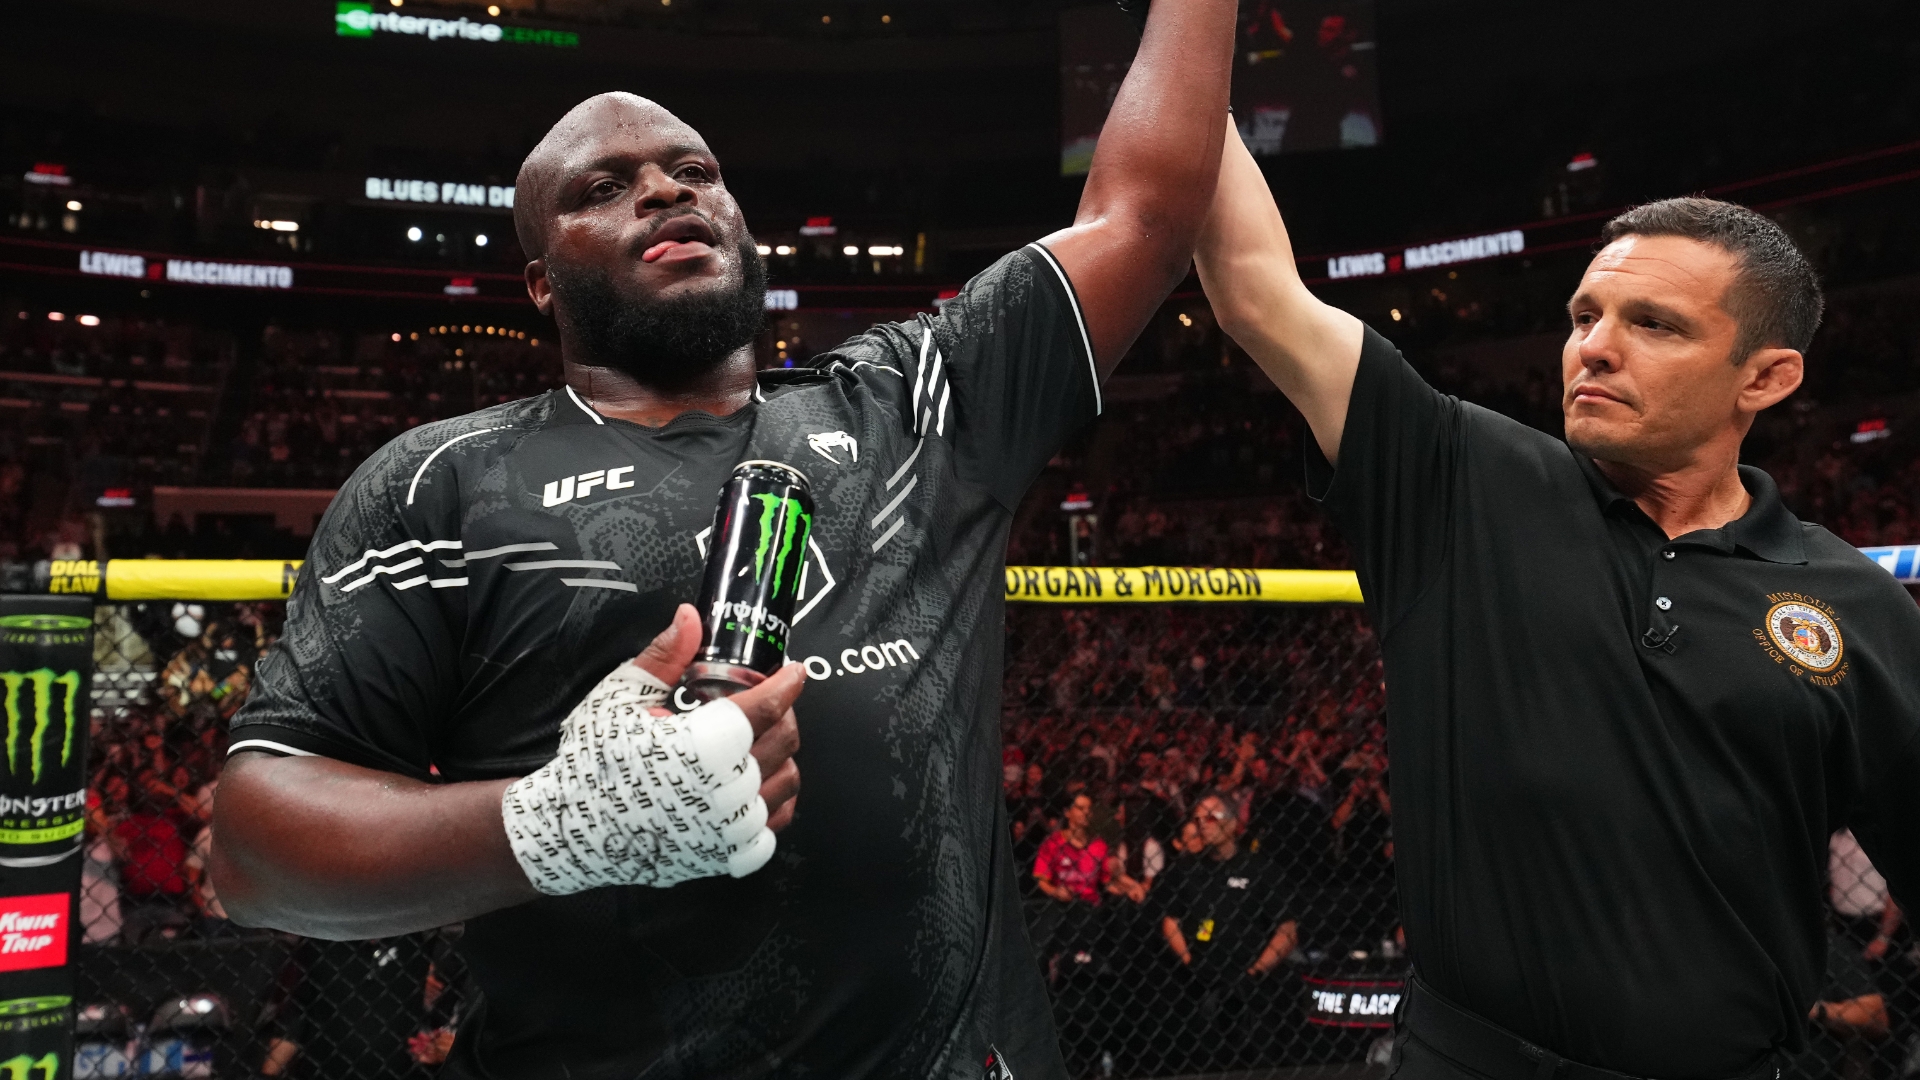 Derrick Lewis celebrates in hilarious fashion after TKO win in main event